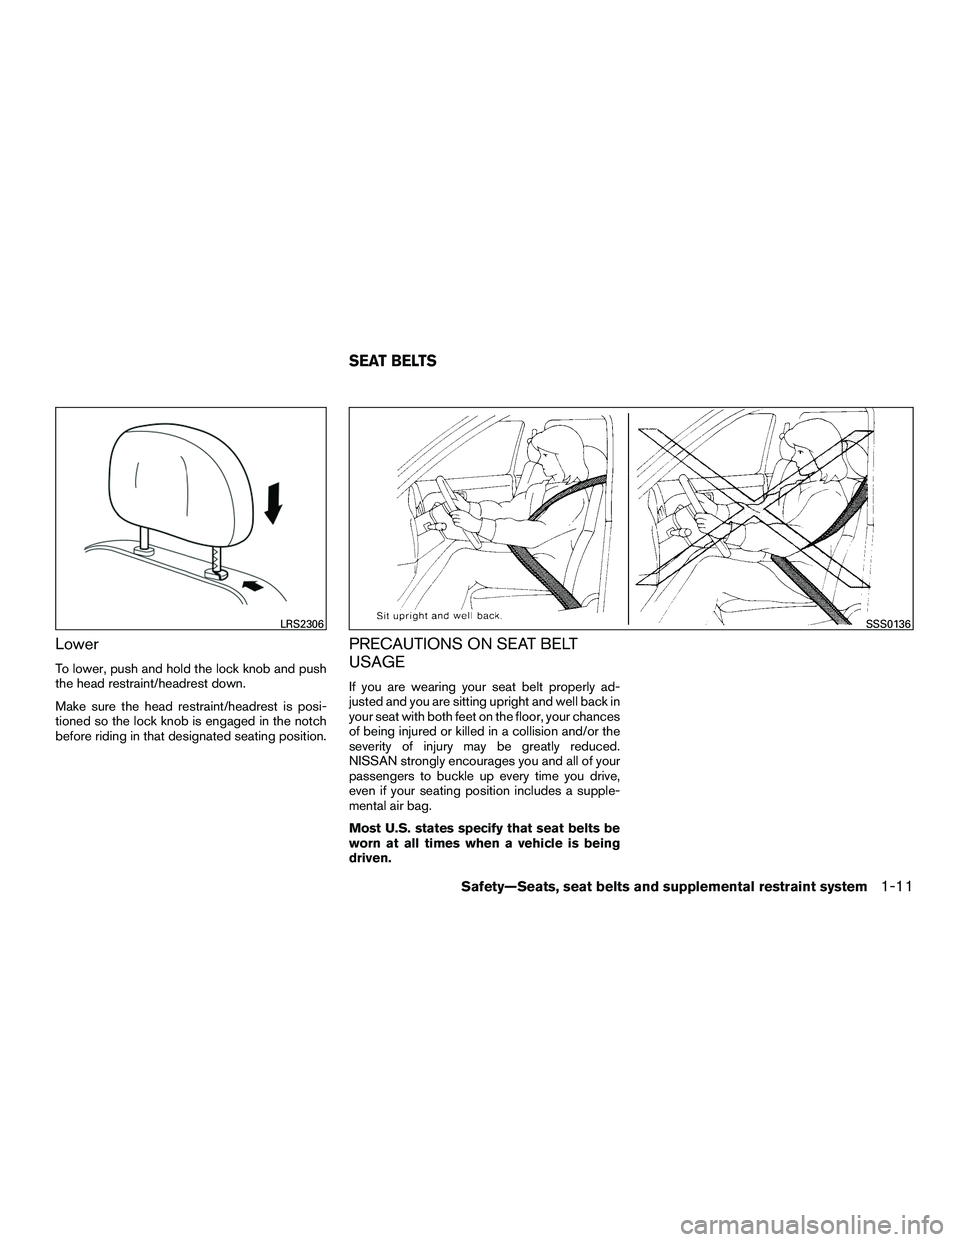 NISSAN NV200 2016 Owners Manual Lower
To lower, push and hold the lock knob and push
the head restraint/headrest down.
Make sure the head restraint/headrest is posi-
tioned so the lock knob is engaged in the notch
before riding in t